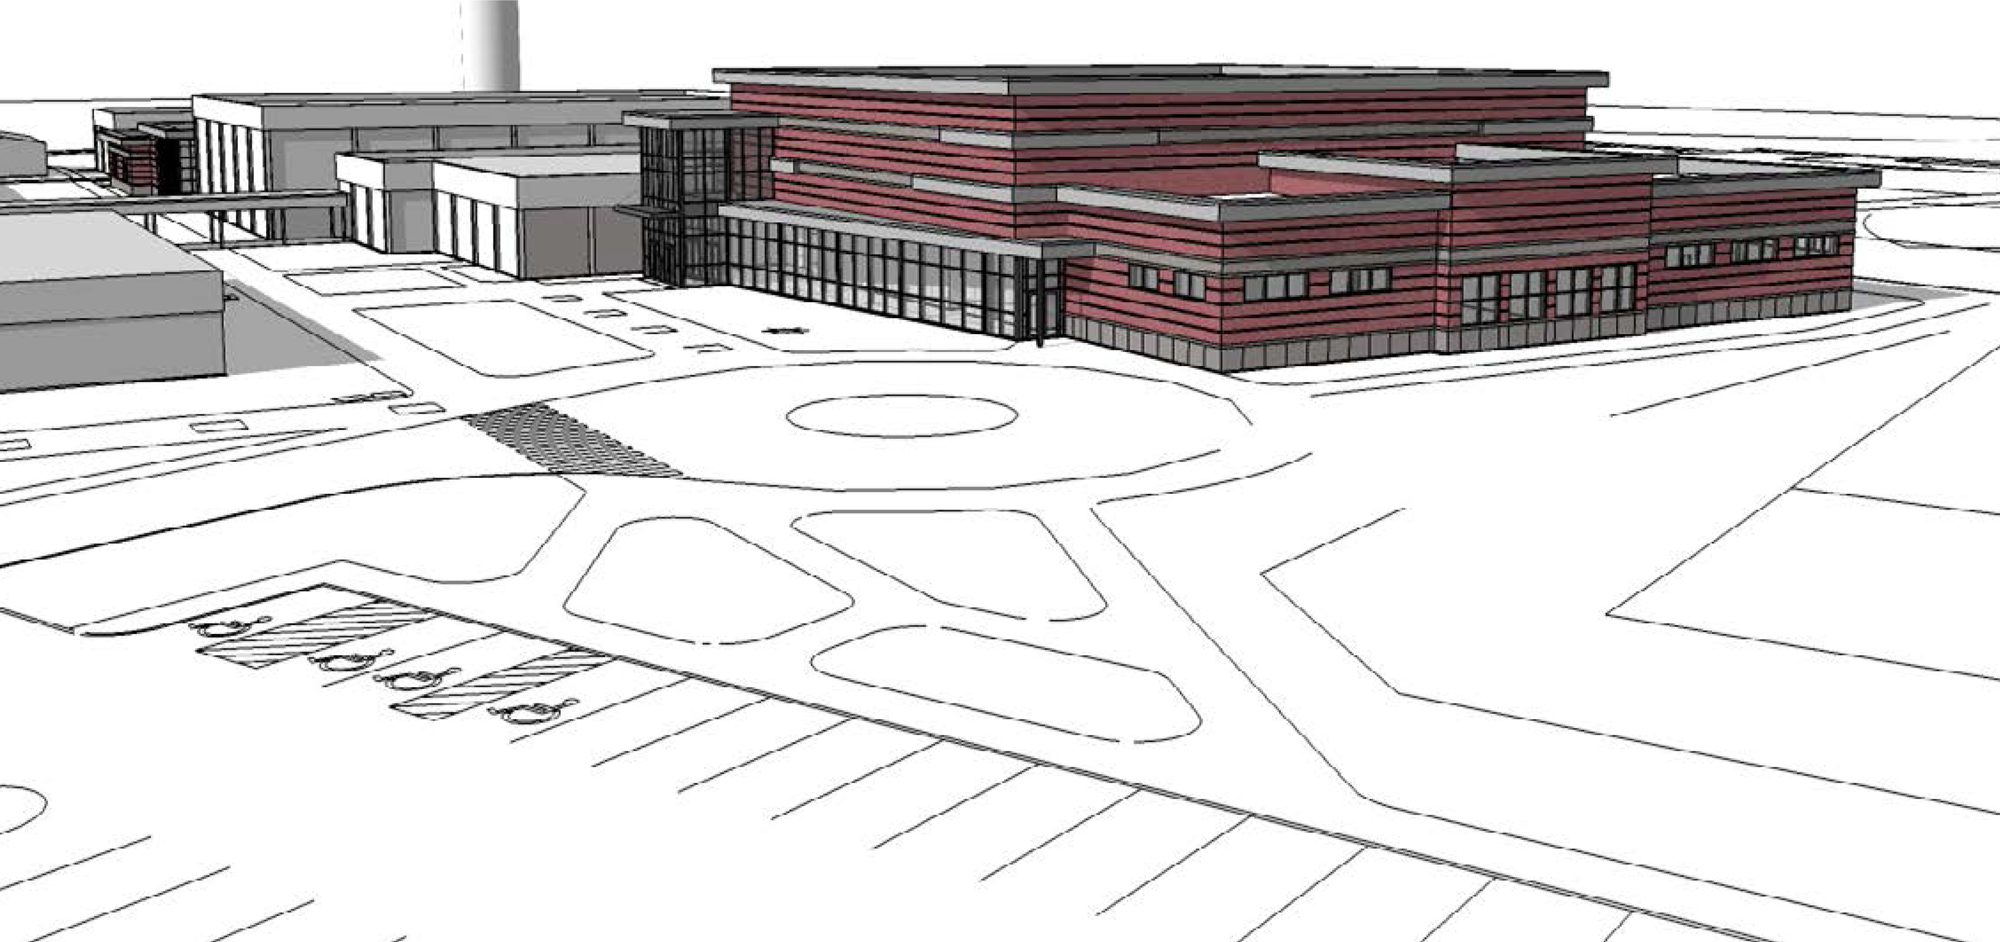 The Ridgefield School District plans to build a new multipurpose building at the high school as part of $49 million in new construction planned throughout the district.